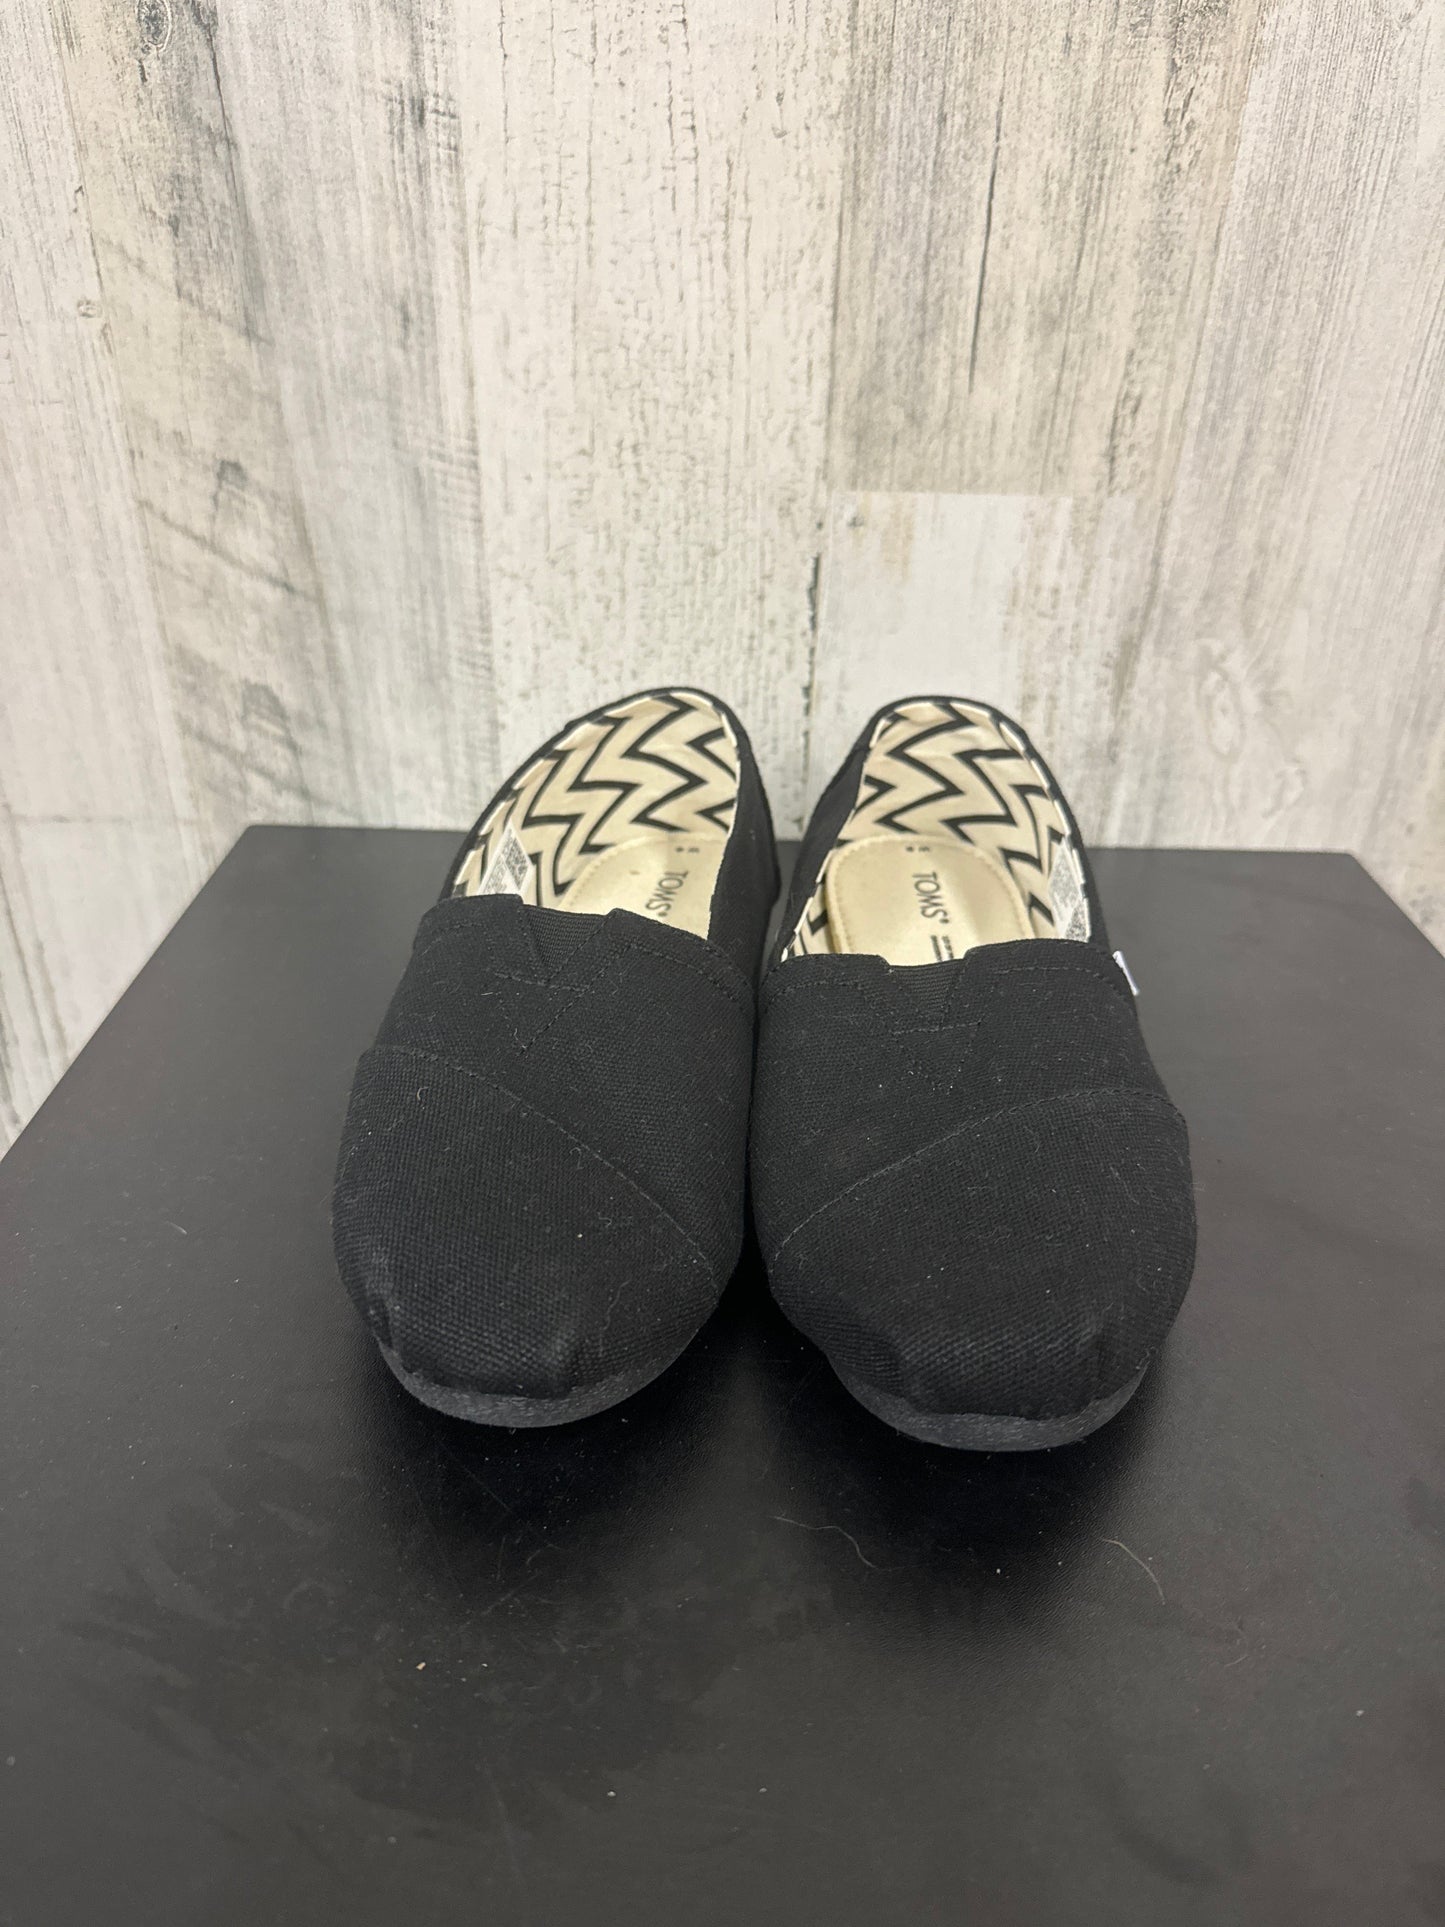 Shoes Flats By Toms  Size: 6